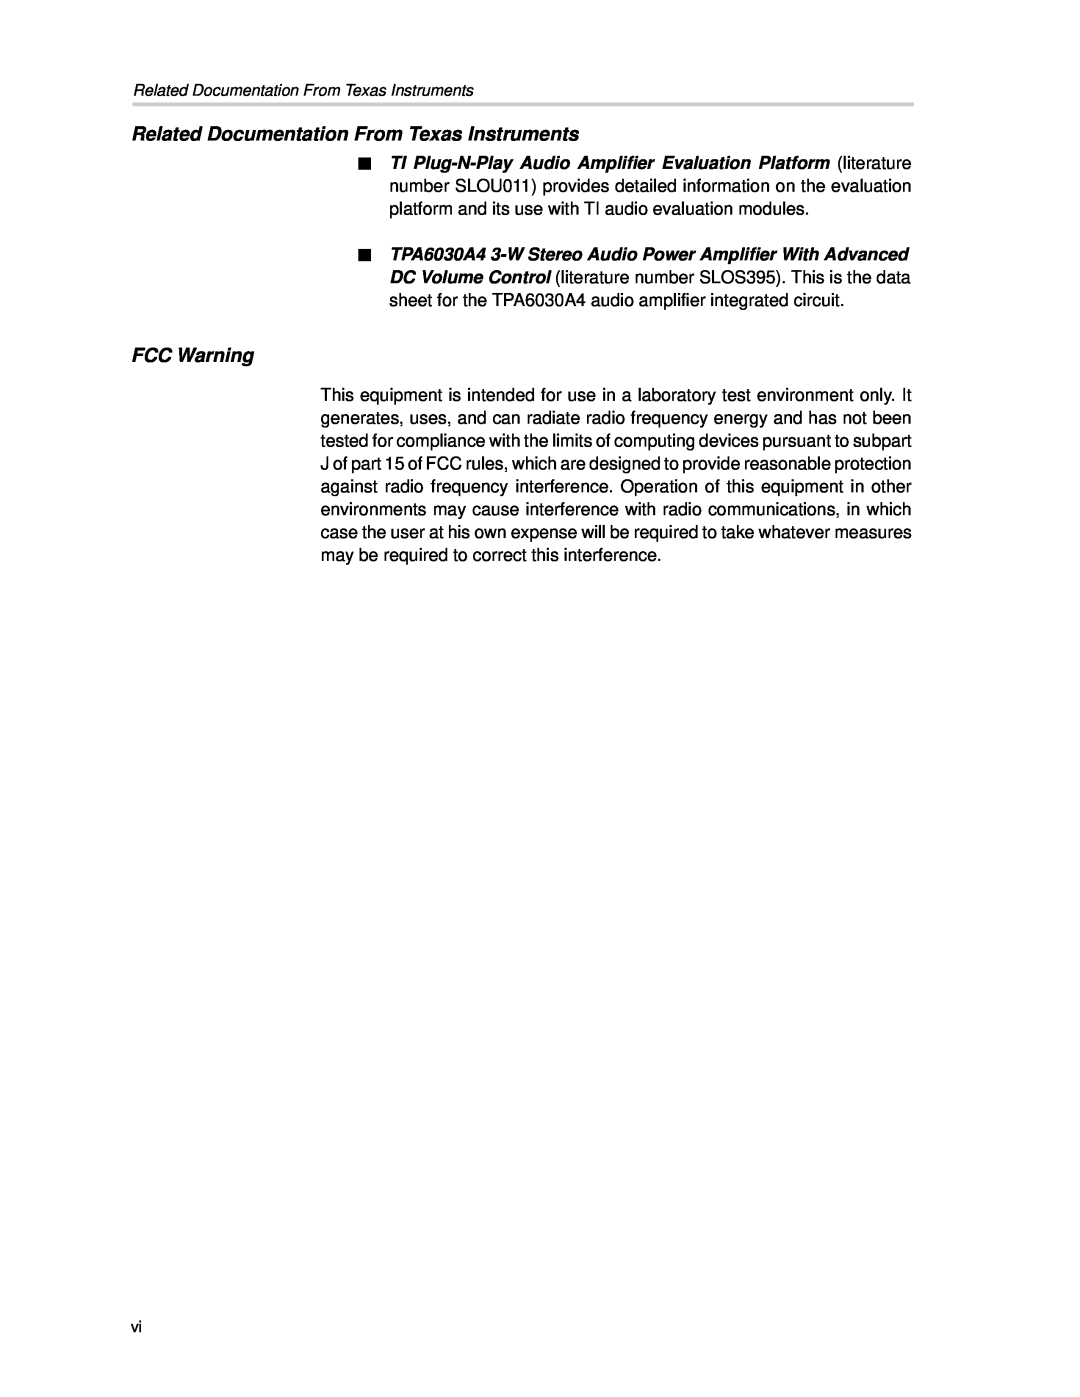 Texas Instruments TPA6030A4 manual Related Documentation From Texas Instruments, FCC Warning 